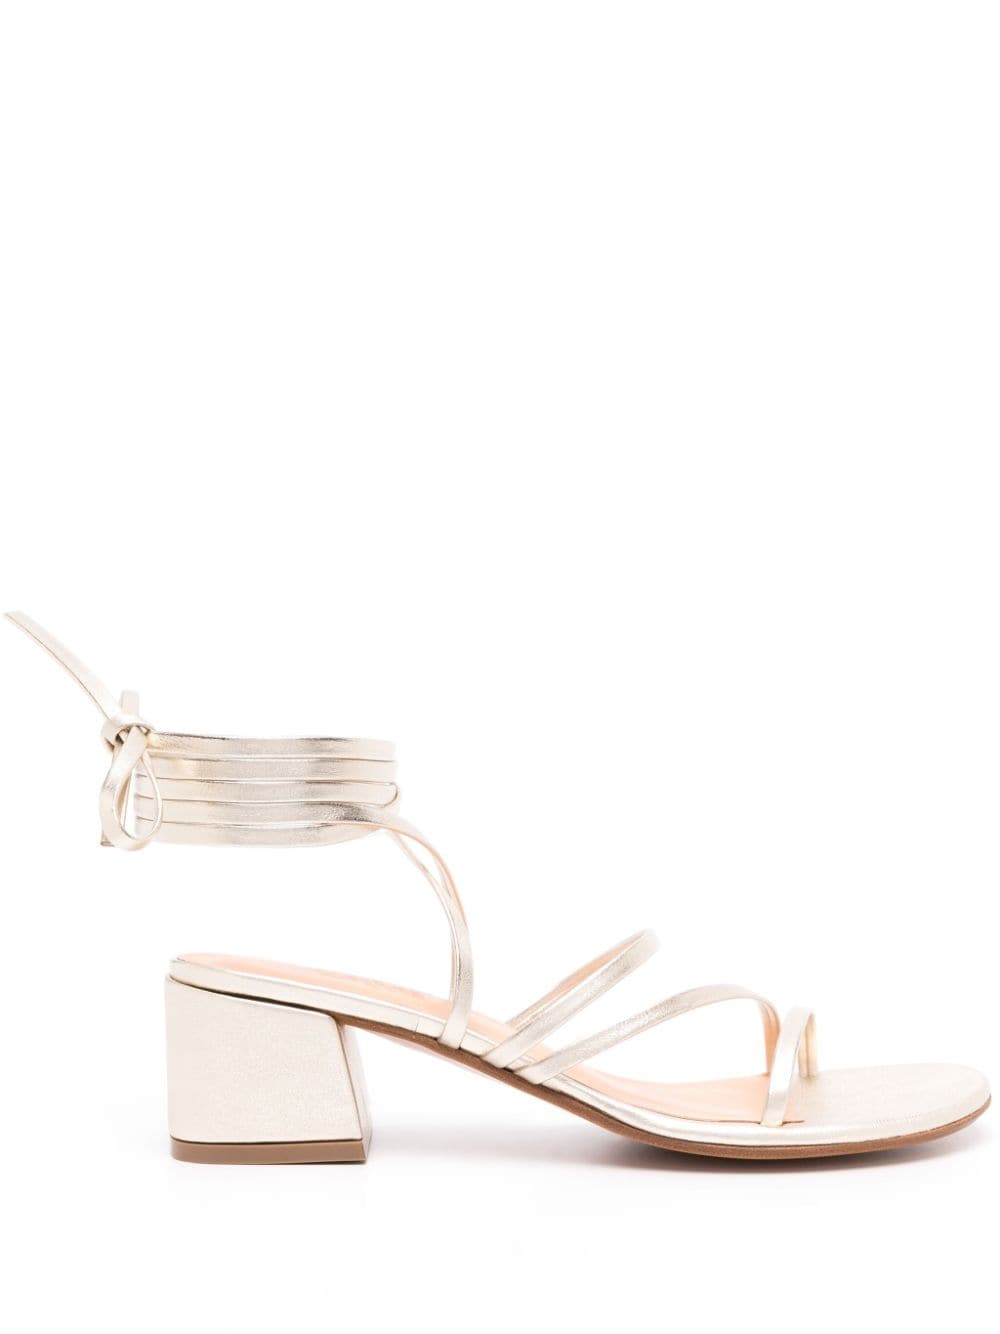 Lithi strappy sandals